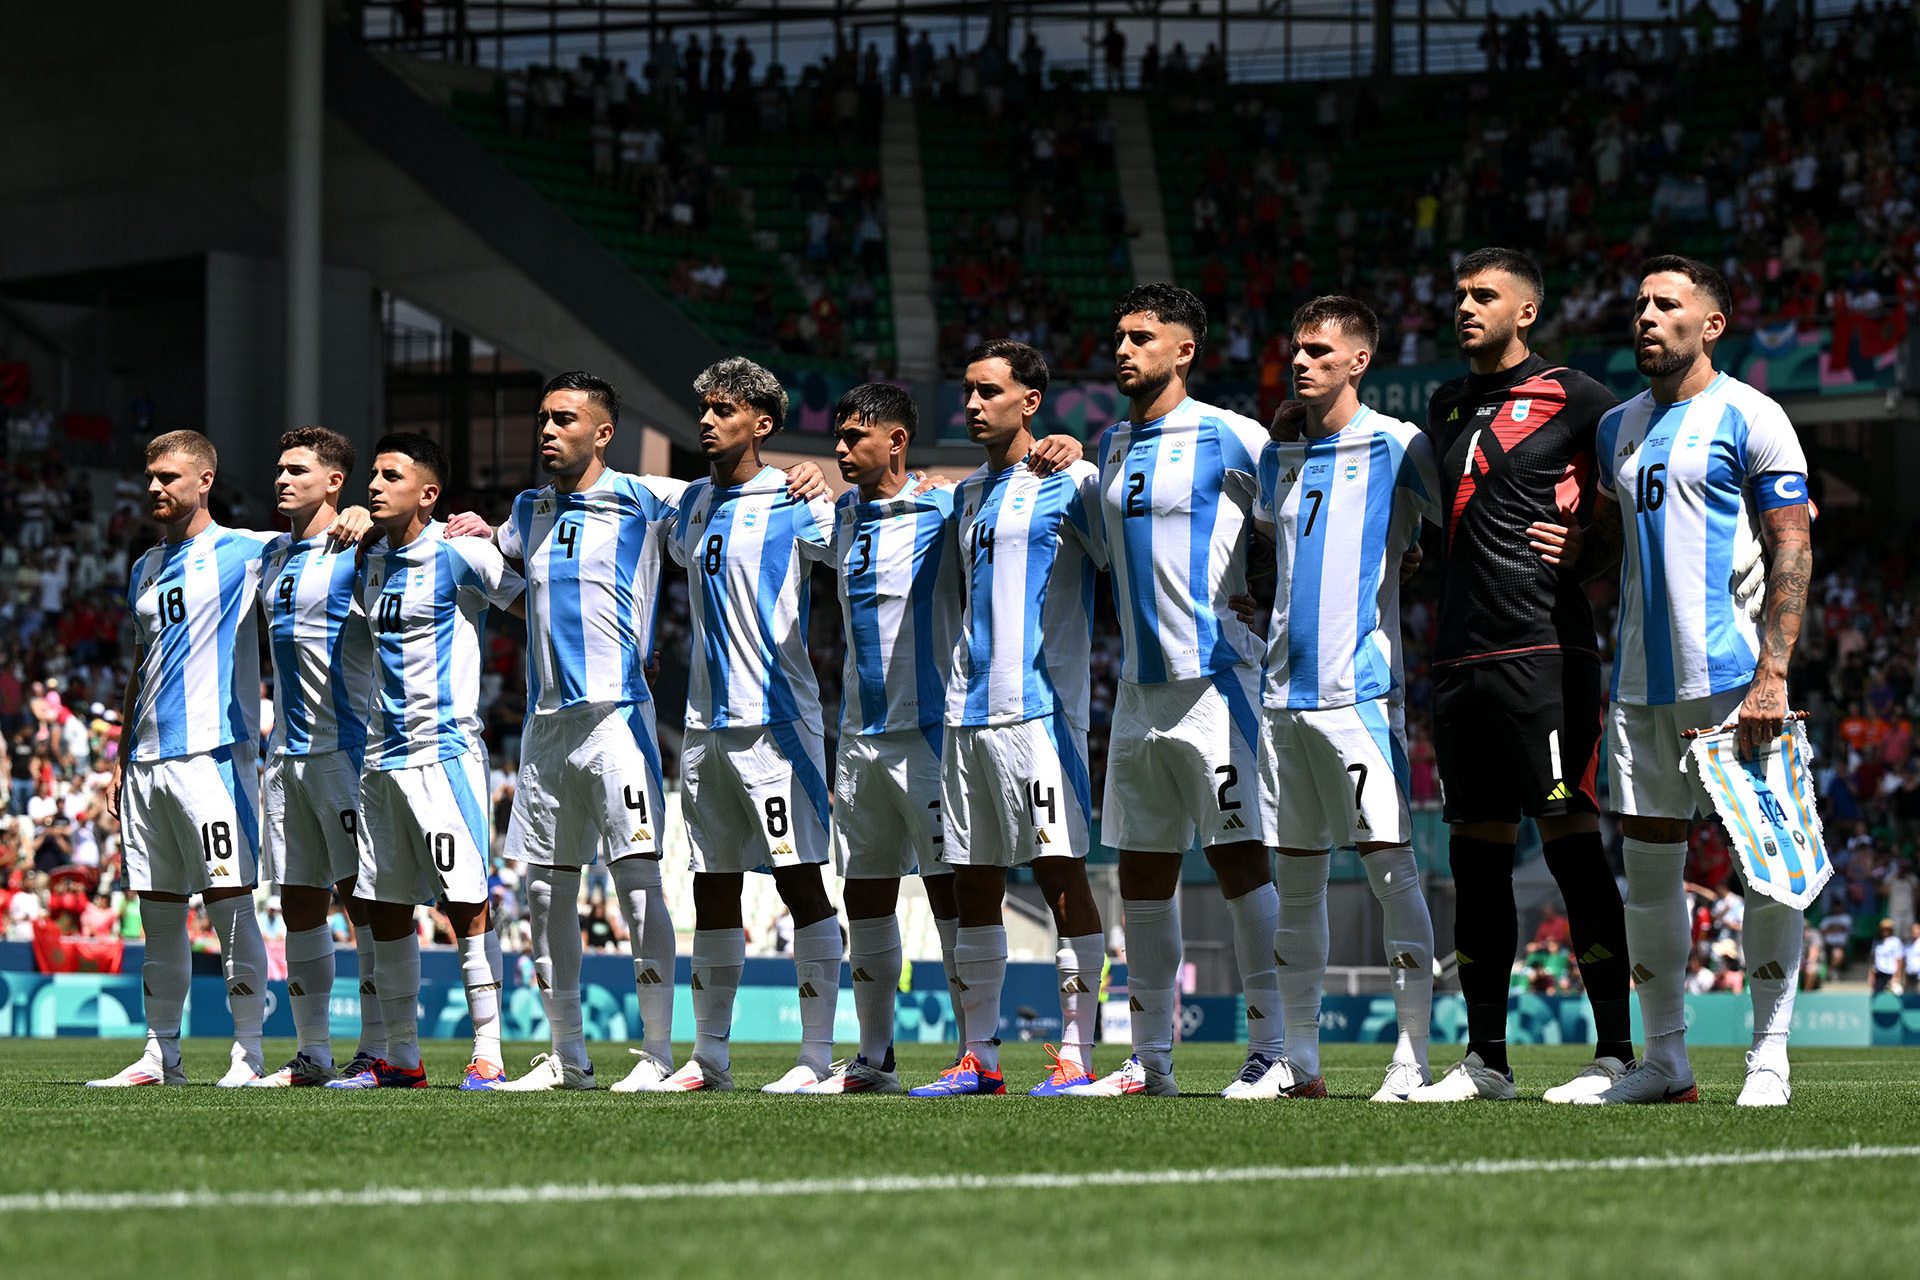 Argentinians suffer the same fate